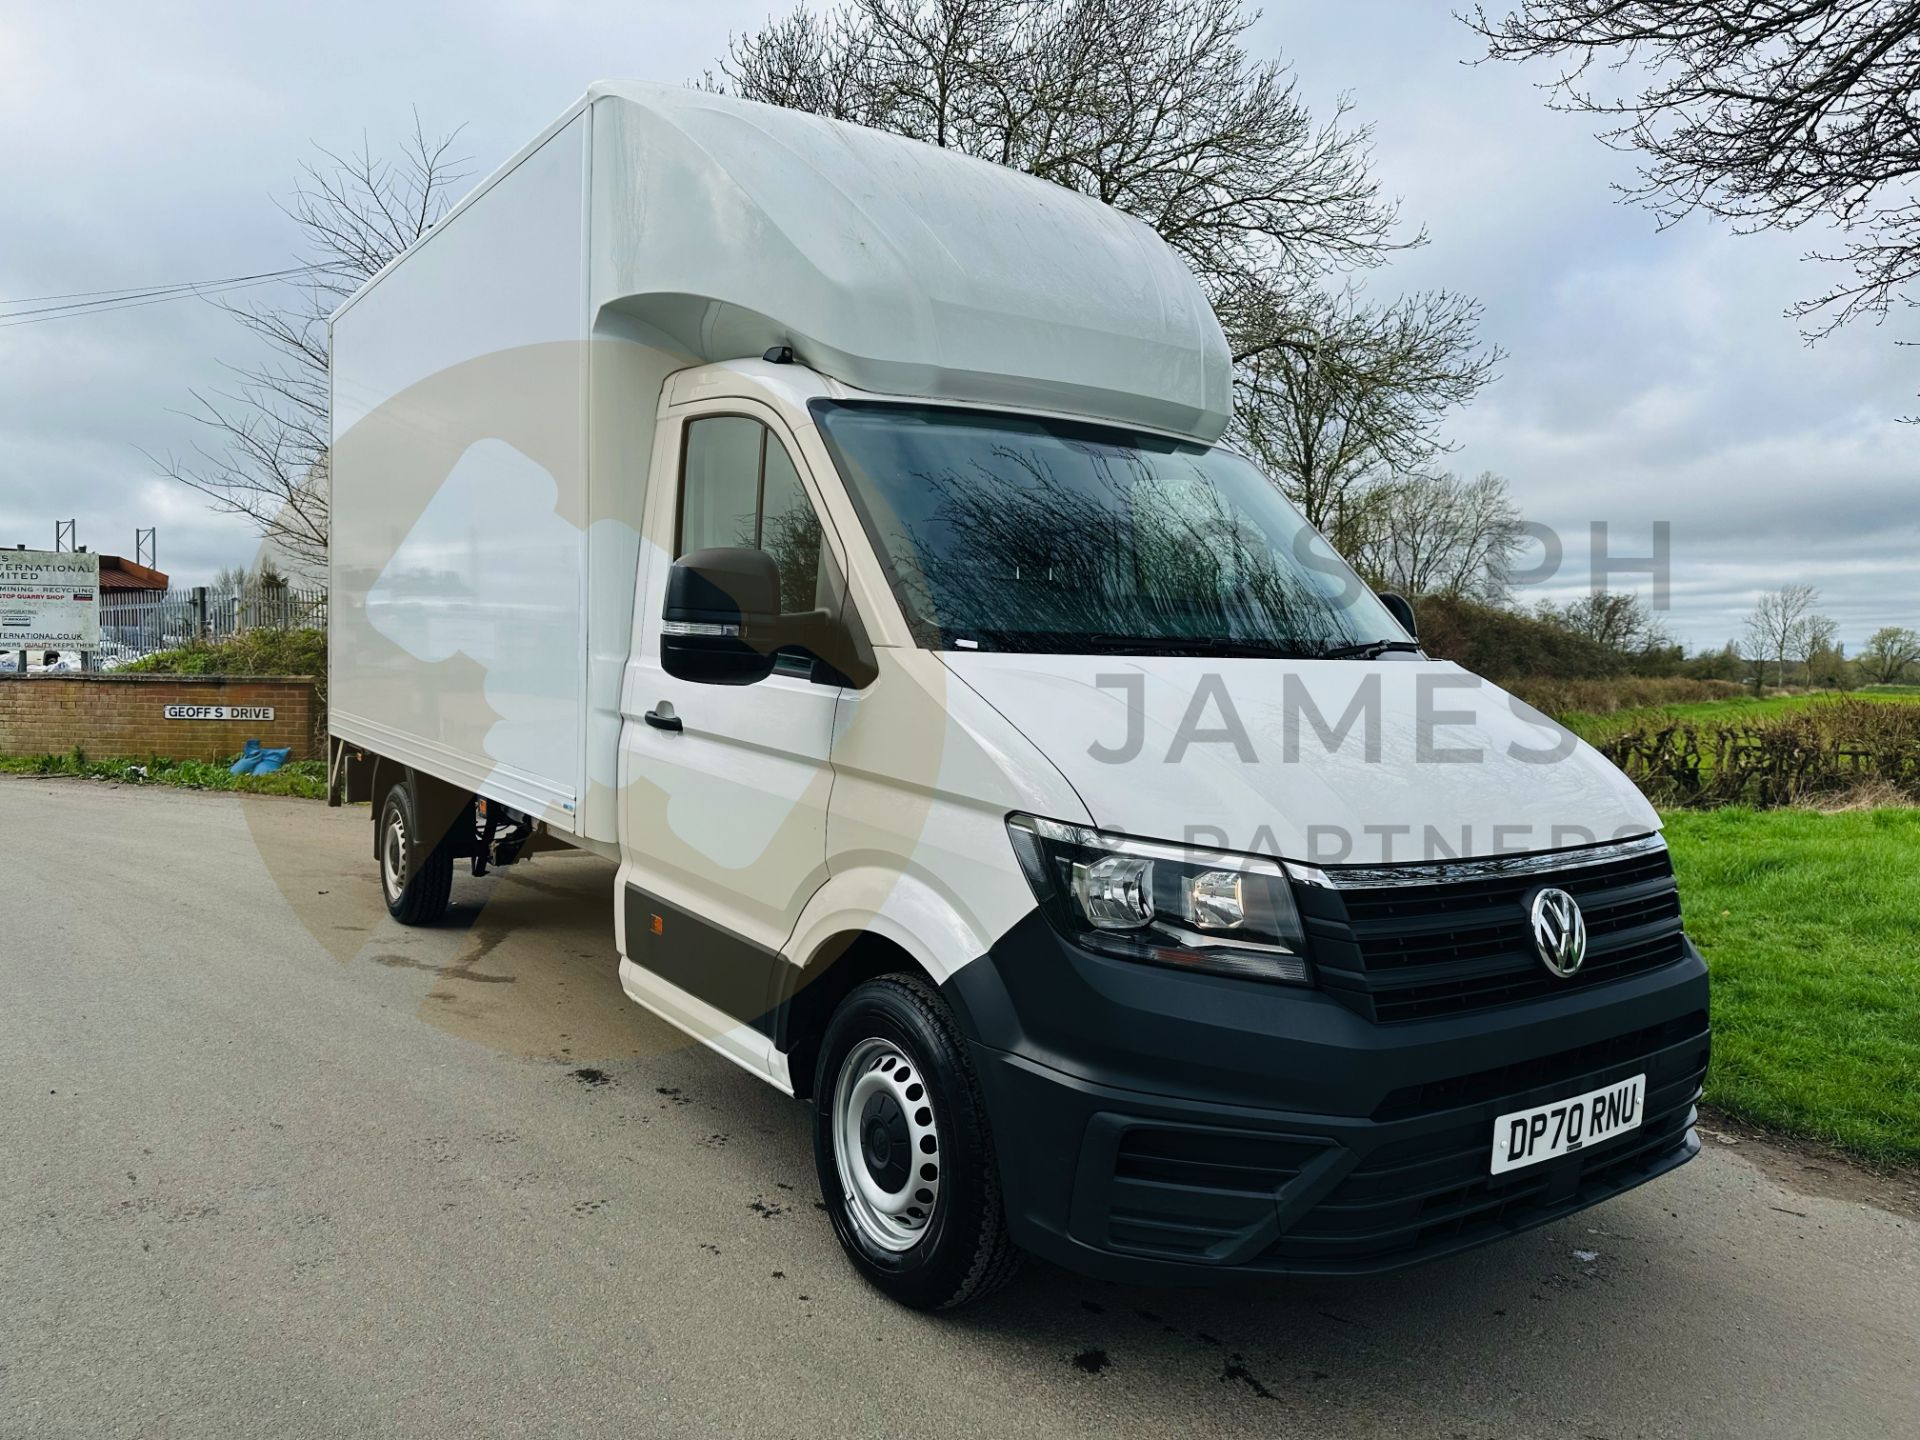 VOLKSWAGEN CRAFTER 2.0 TDI (140) LWB LUTON WITH TAIL LIFT (2021 MODEL) 1 OWNER - LOW MILES - AIR CON - Image 2 of 27